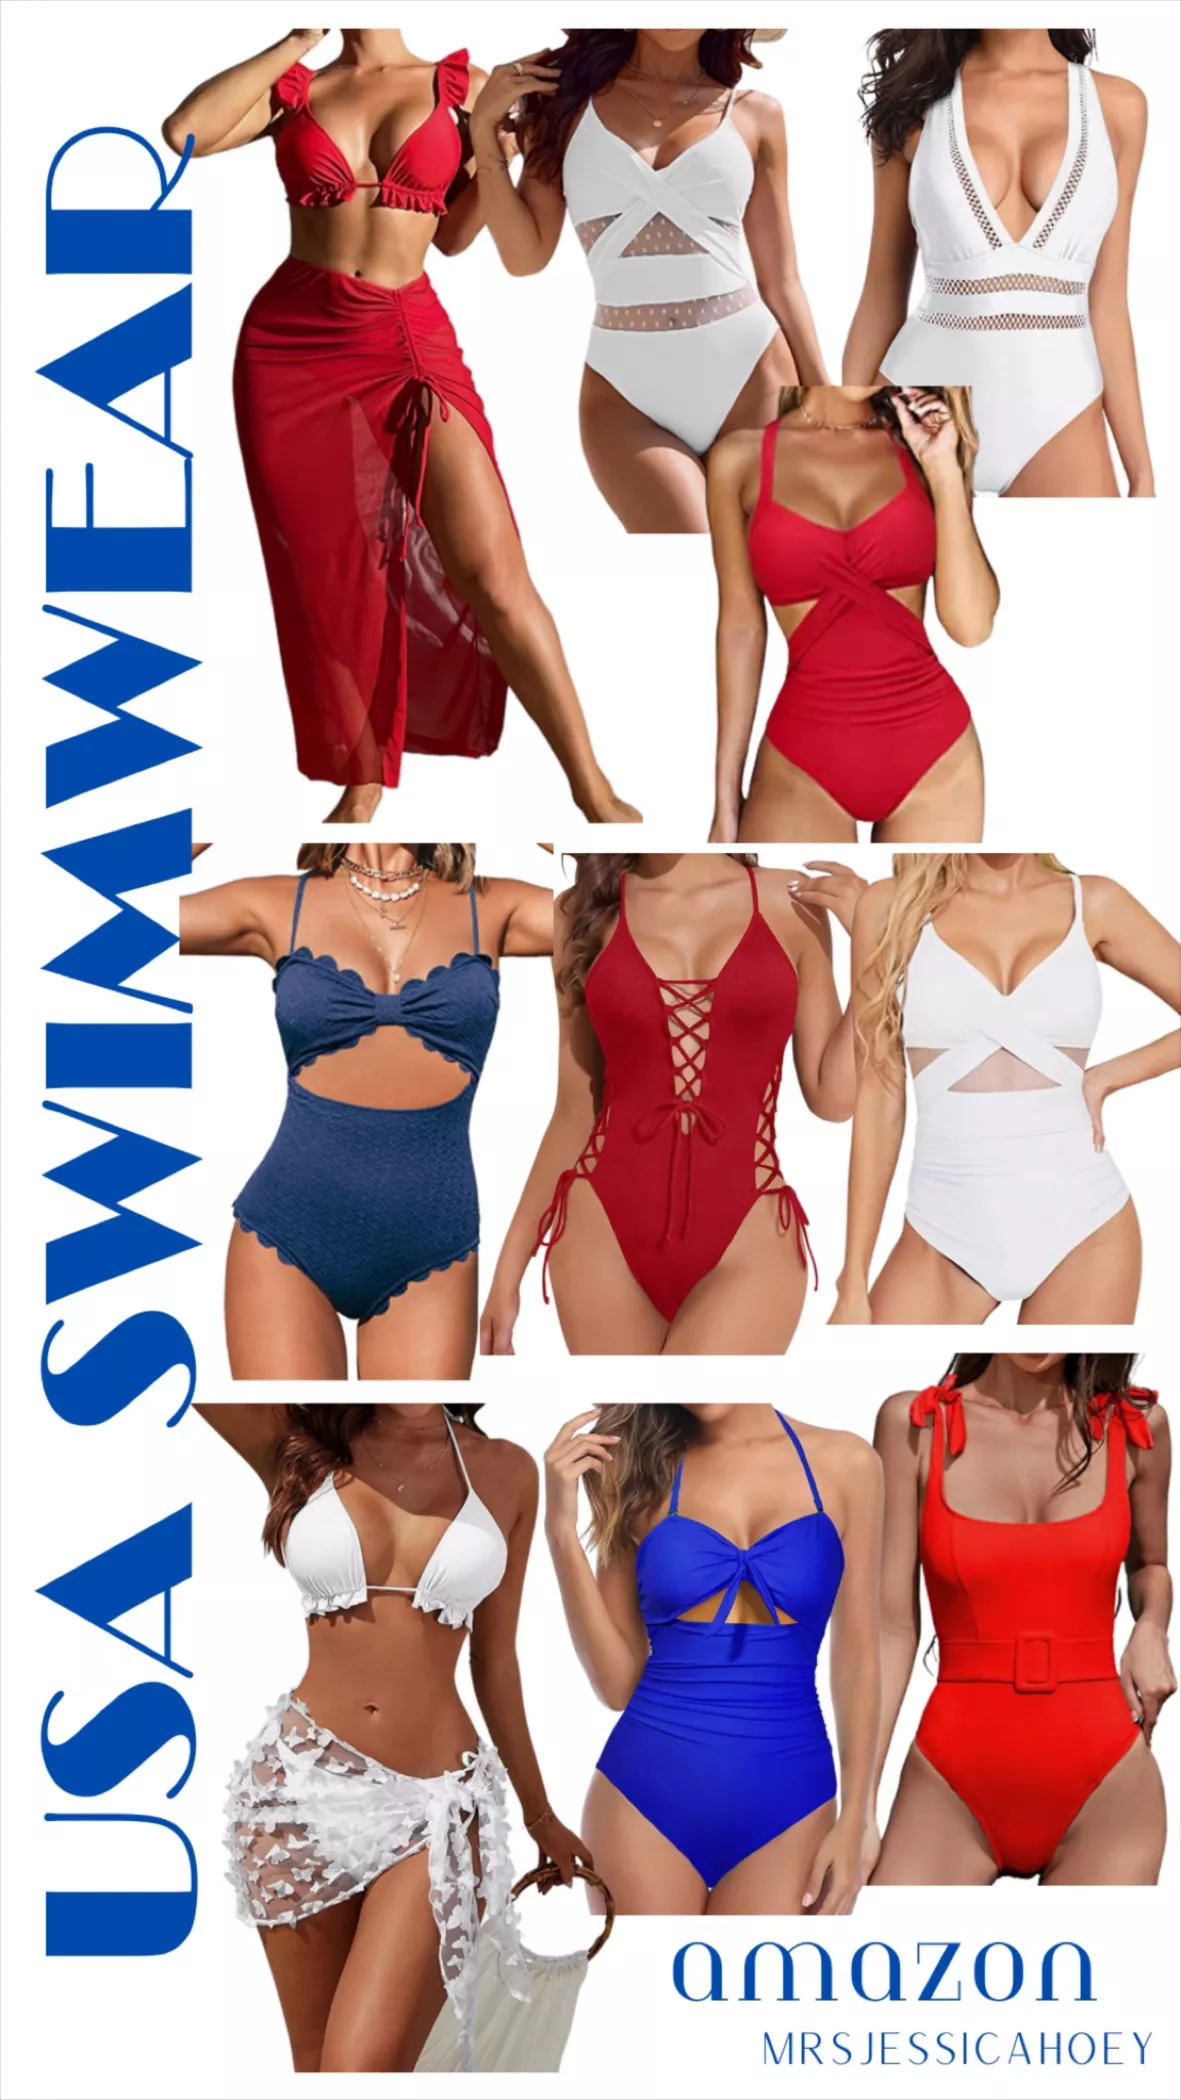 Women's One Piece Swimsuit Tummy Control V Neck Bathing Suits